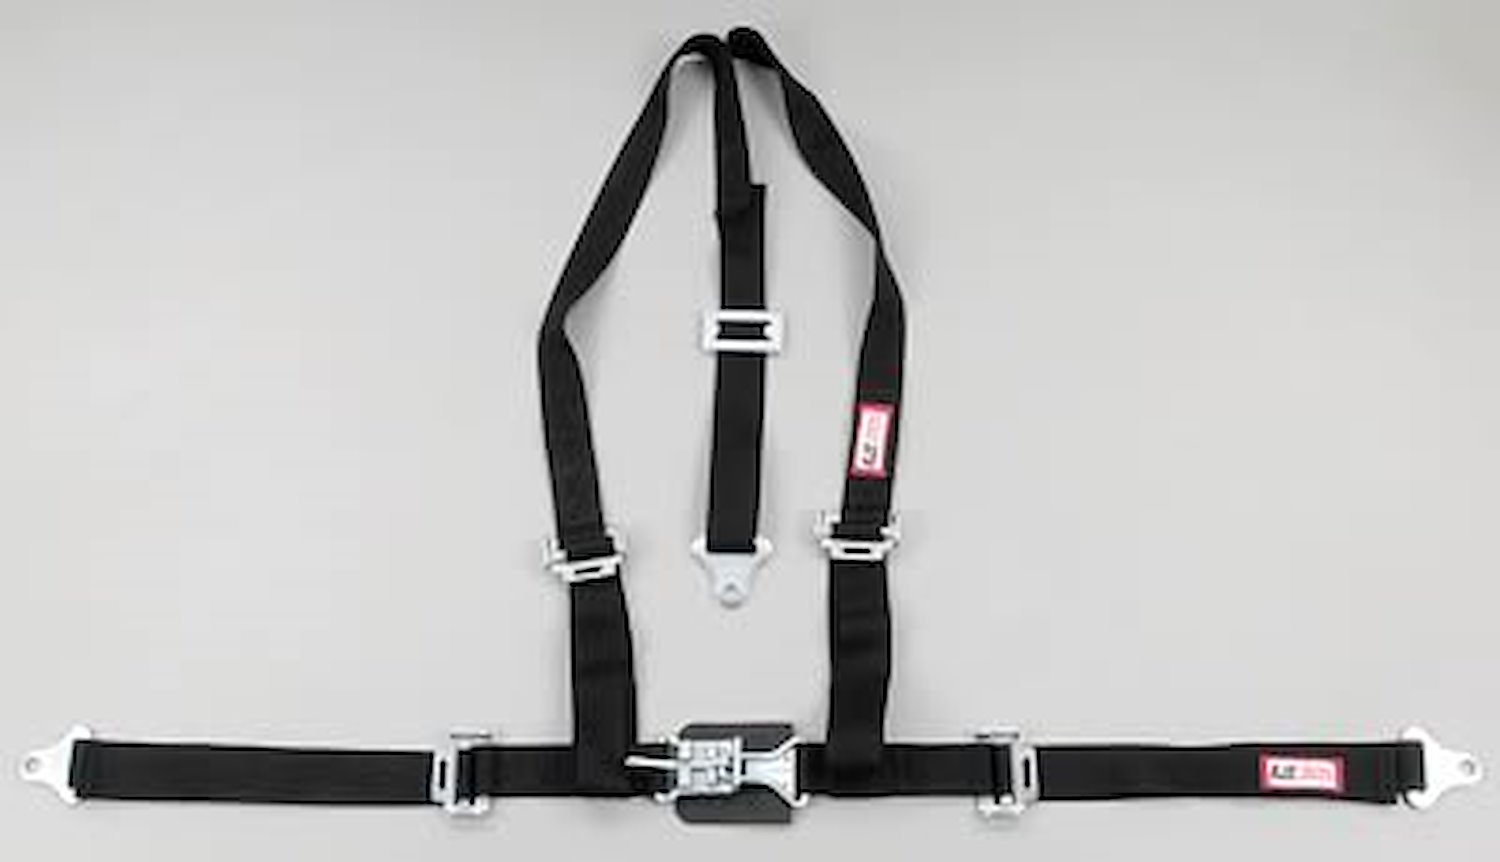 NON-SFI L&L HARNESS 3 PULL DOWN Lap Belt SEWN IN 2 Shoulder Harness V ROLL BAR Mount w/STERNUM STRAP ALL SNAP ENDS BLACK